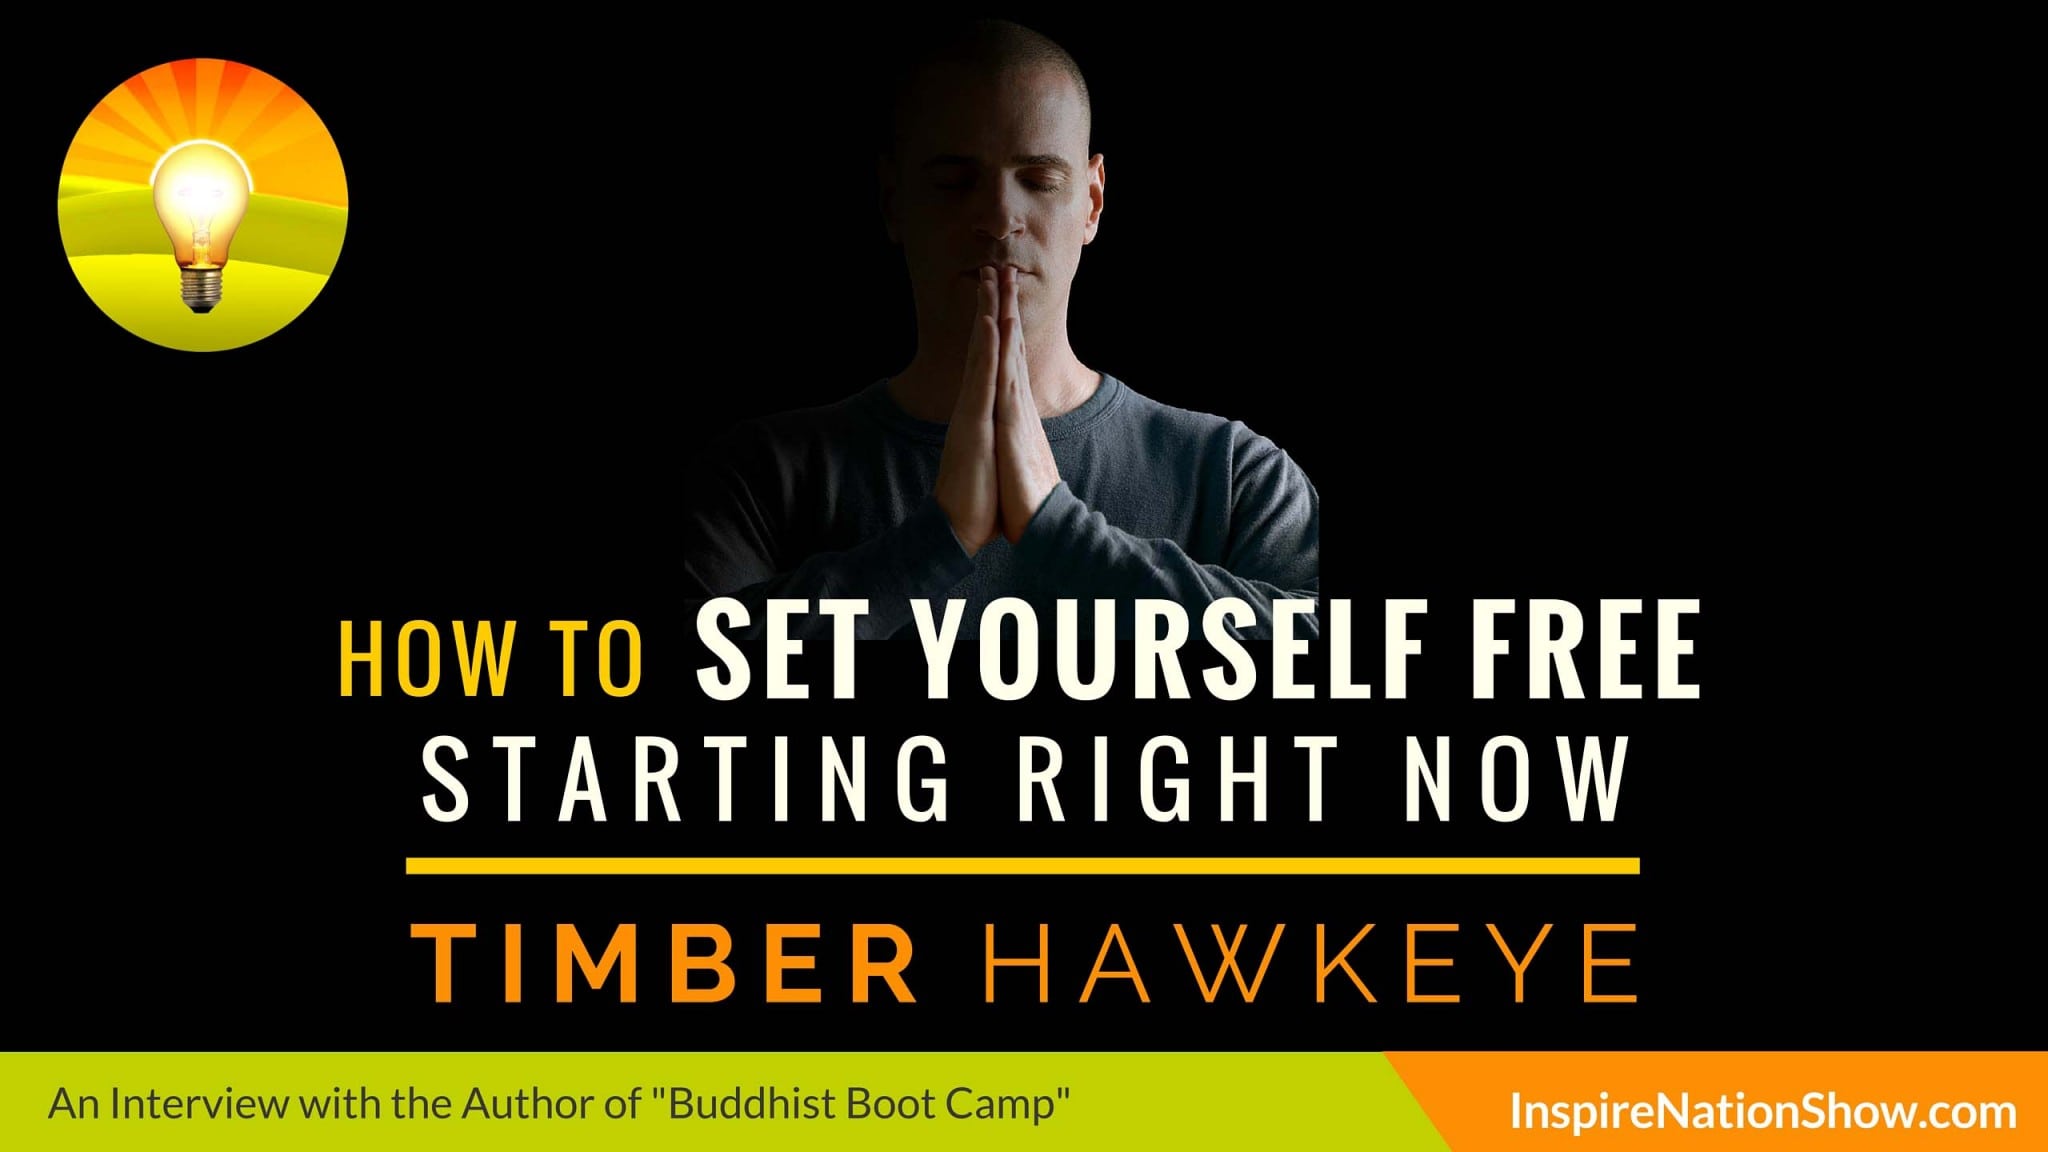 Timber-Hawkeye-Inspire-Nation-Show-podcast-Buddhist-Boot-Camp-how-to-set-yourself-free-freedom-buddhism-spiritual-self-help